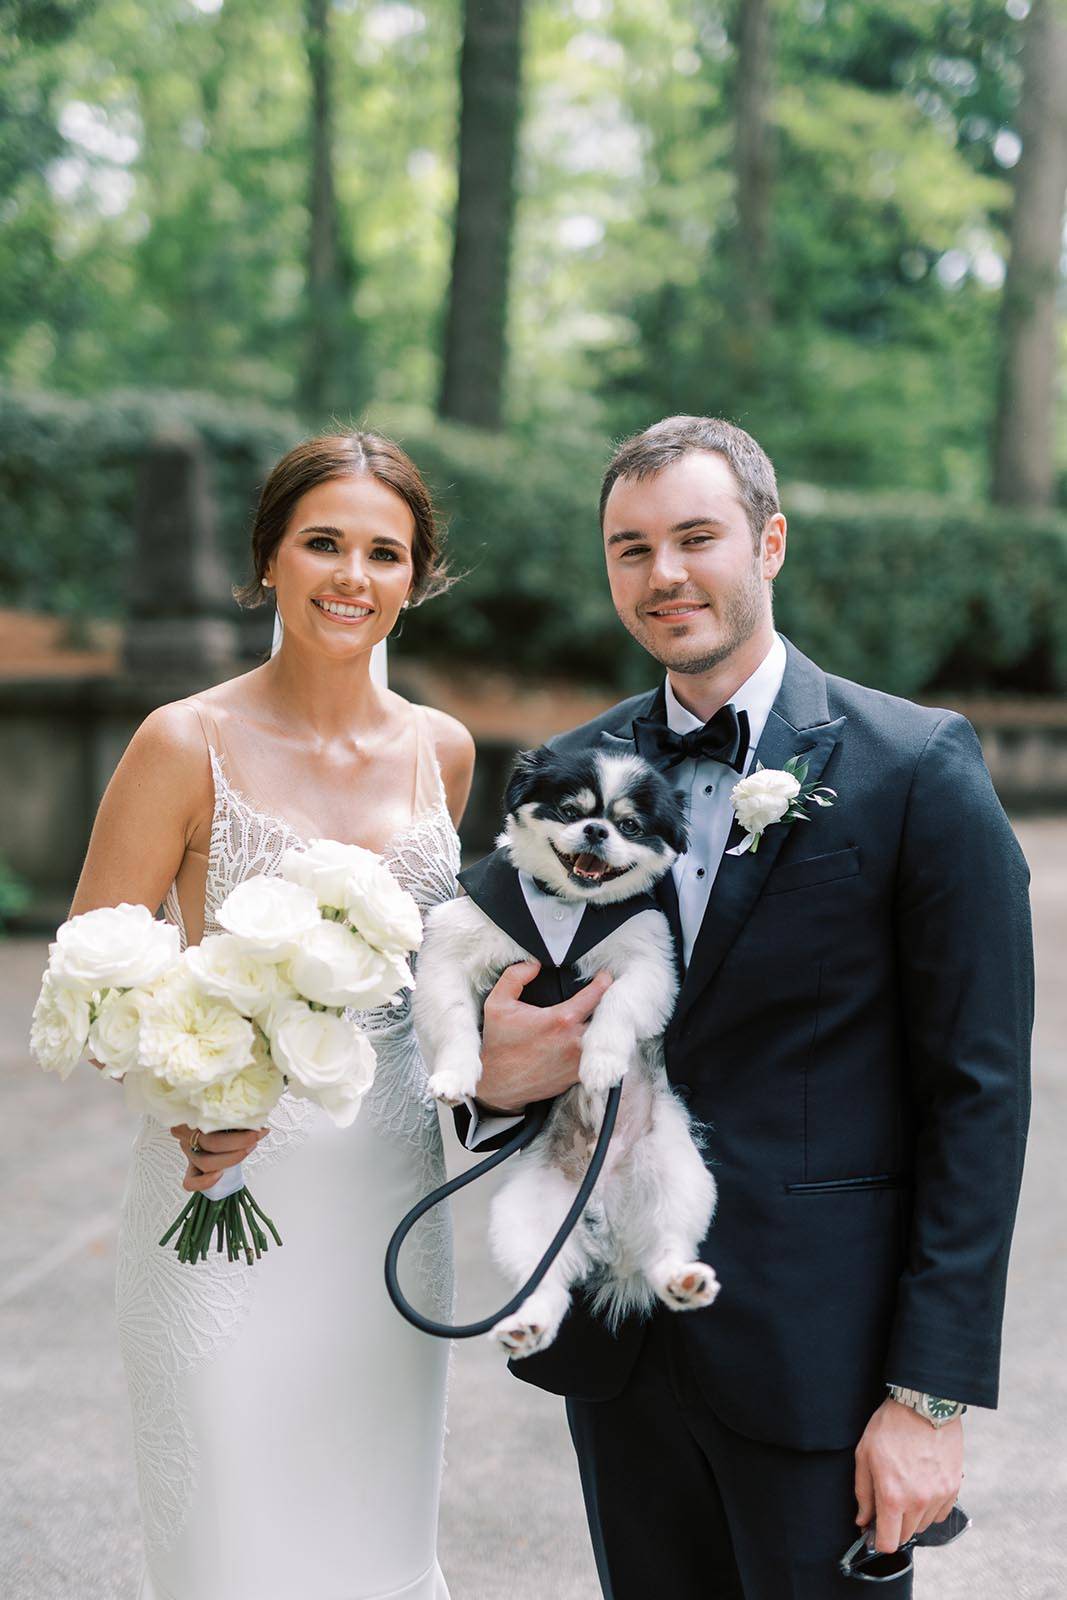 The bride and groom sharing a special moment with their furry companion on their special day.